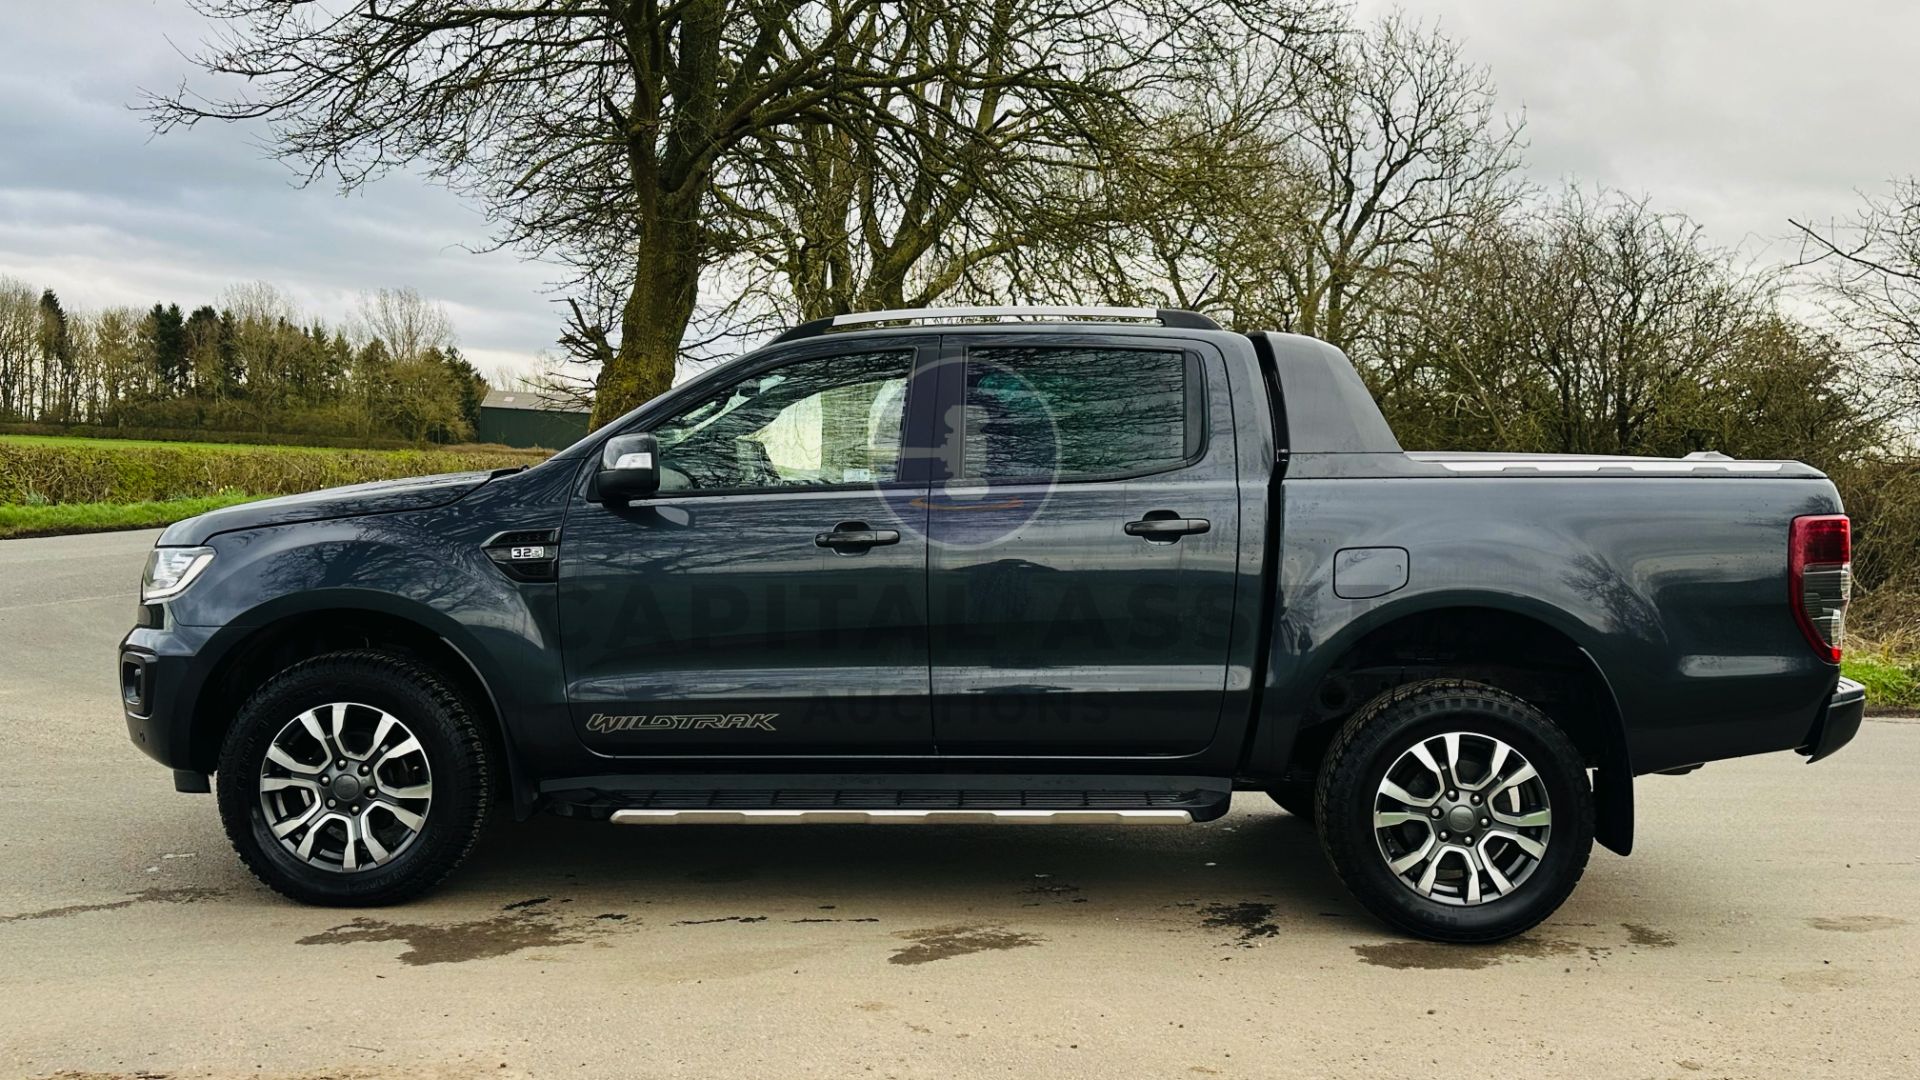 FORD RANGER *WILDTRAK EDITION* DOUBLE CAB PICK-UP (2020 - EURO 6) 3.2 TDCI - AUTOMATIC *HUGE SPEC* - Image 8 of 49